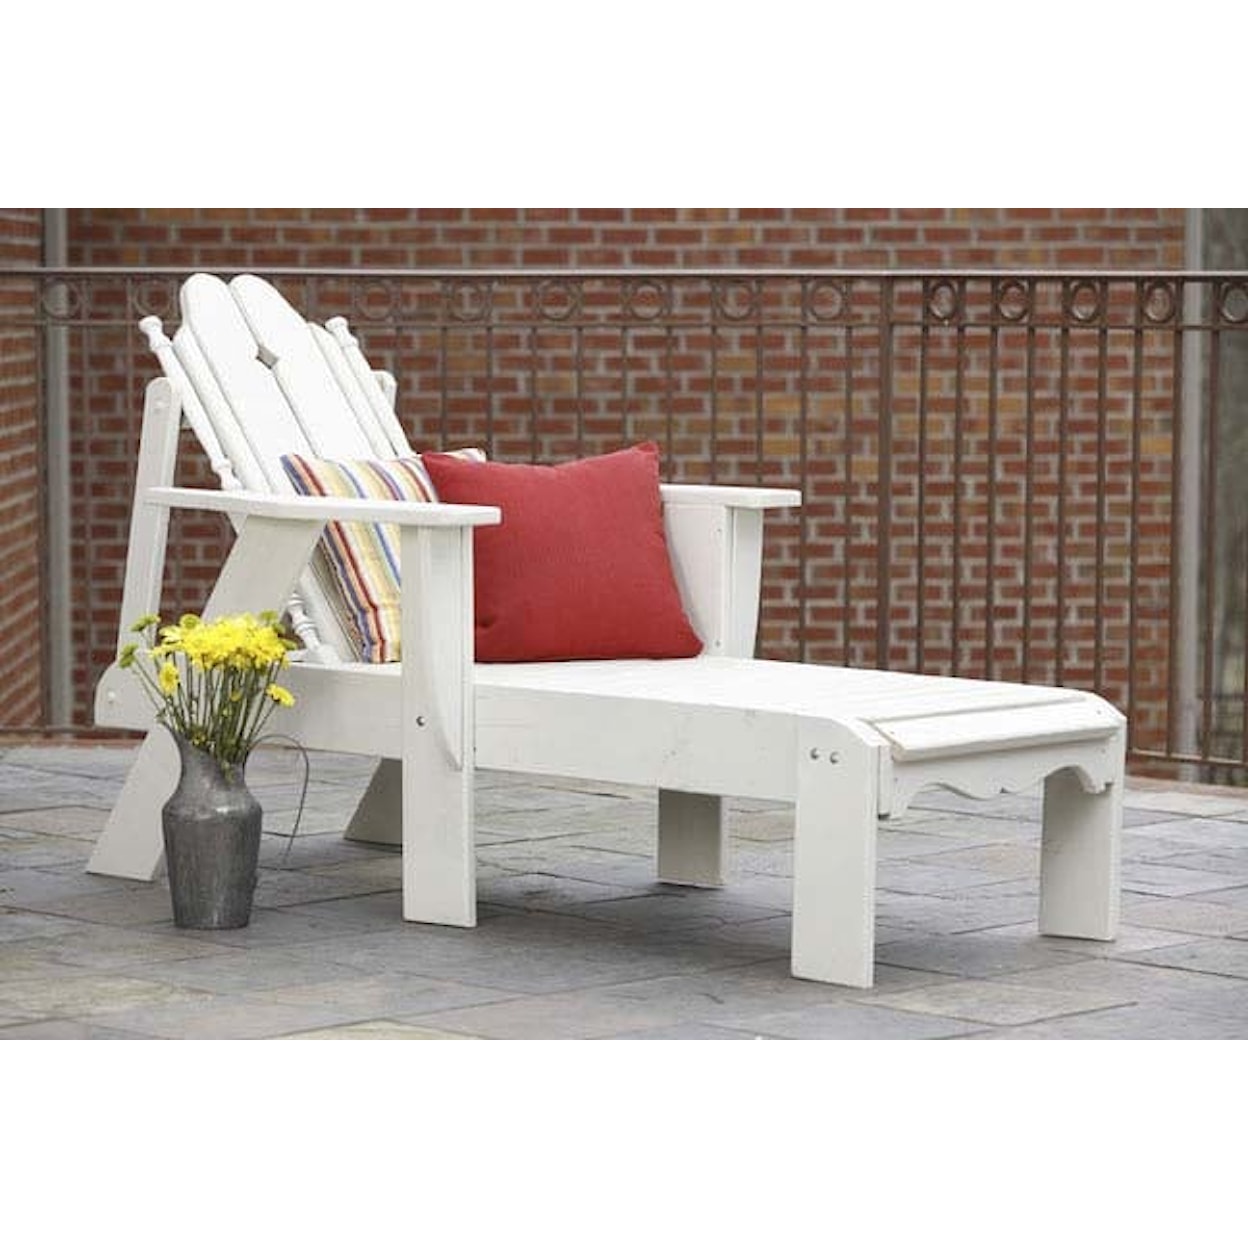 Uwharrie Chair The Nantucket Collection NANTUCKET ADJUSTABLE CHAISE LOUNGE